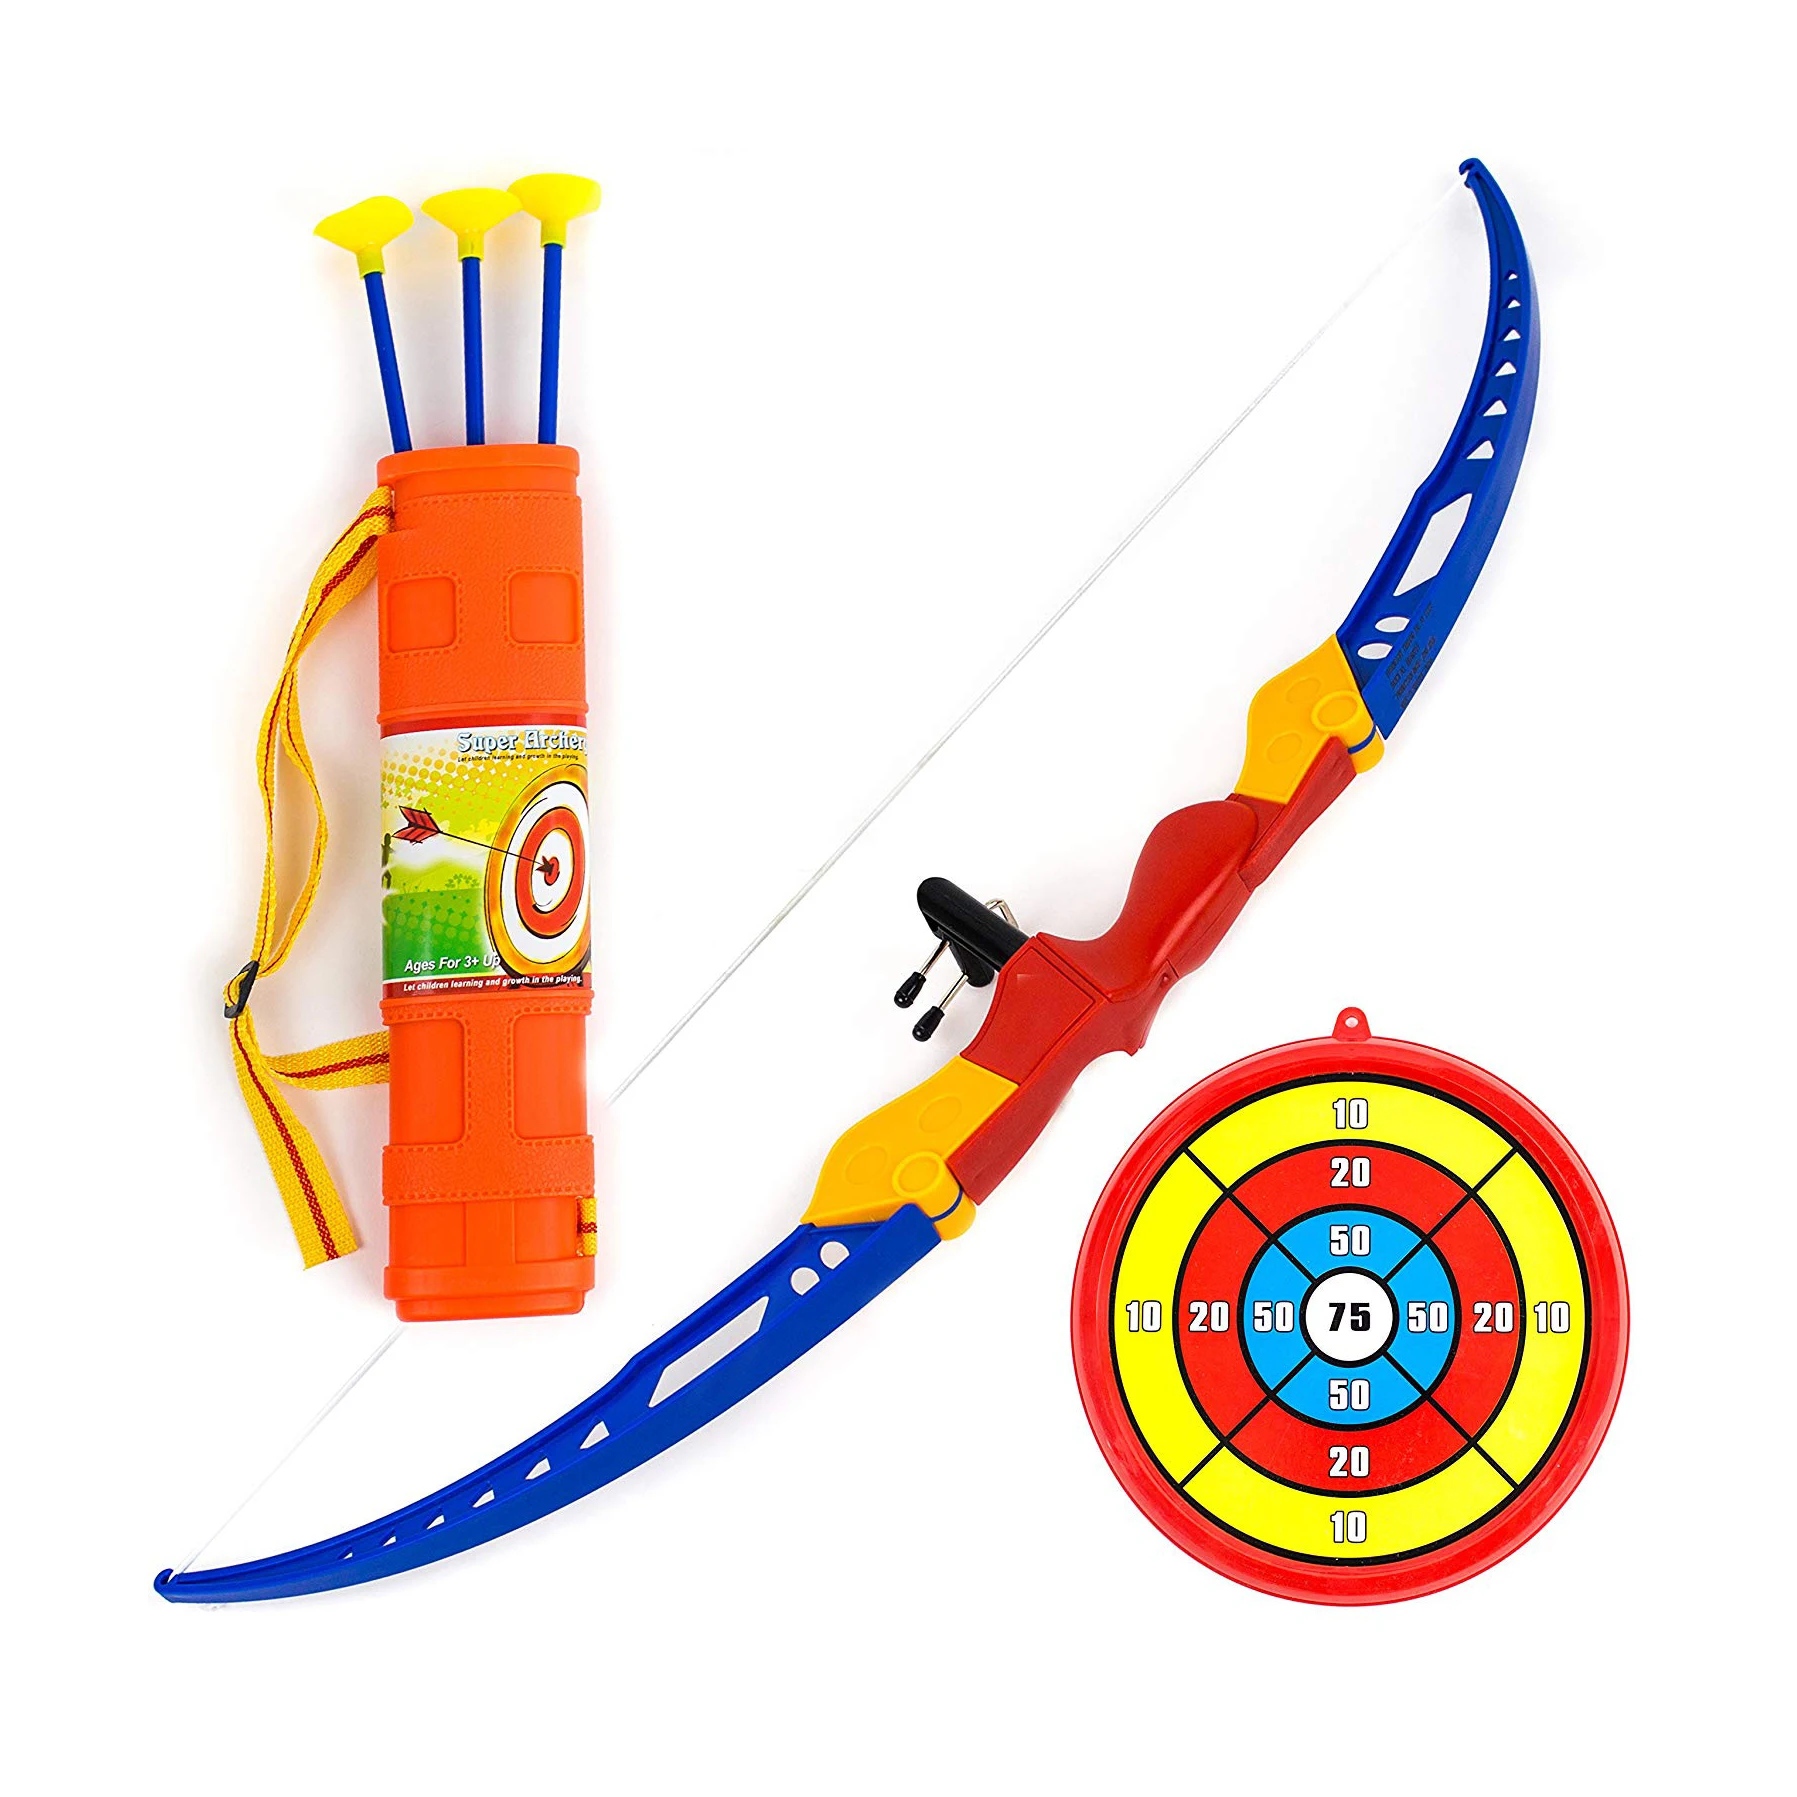 Archery Bow and Arrow Game Set Toy Fun for Kids Children Garden Outdoor 